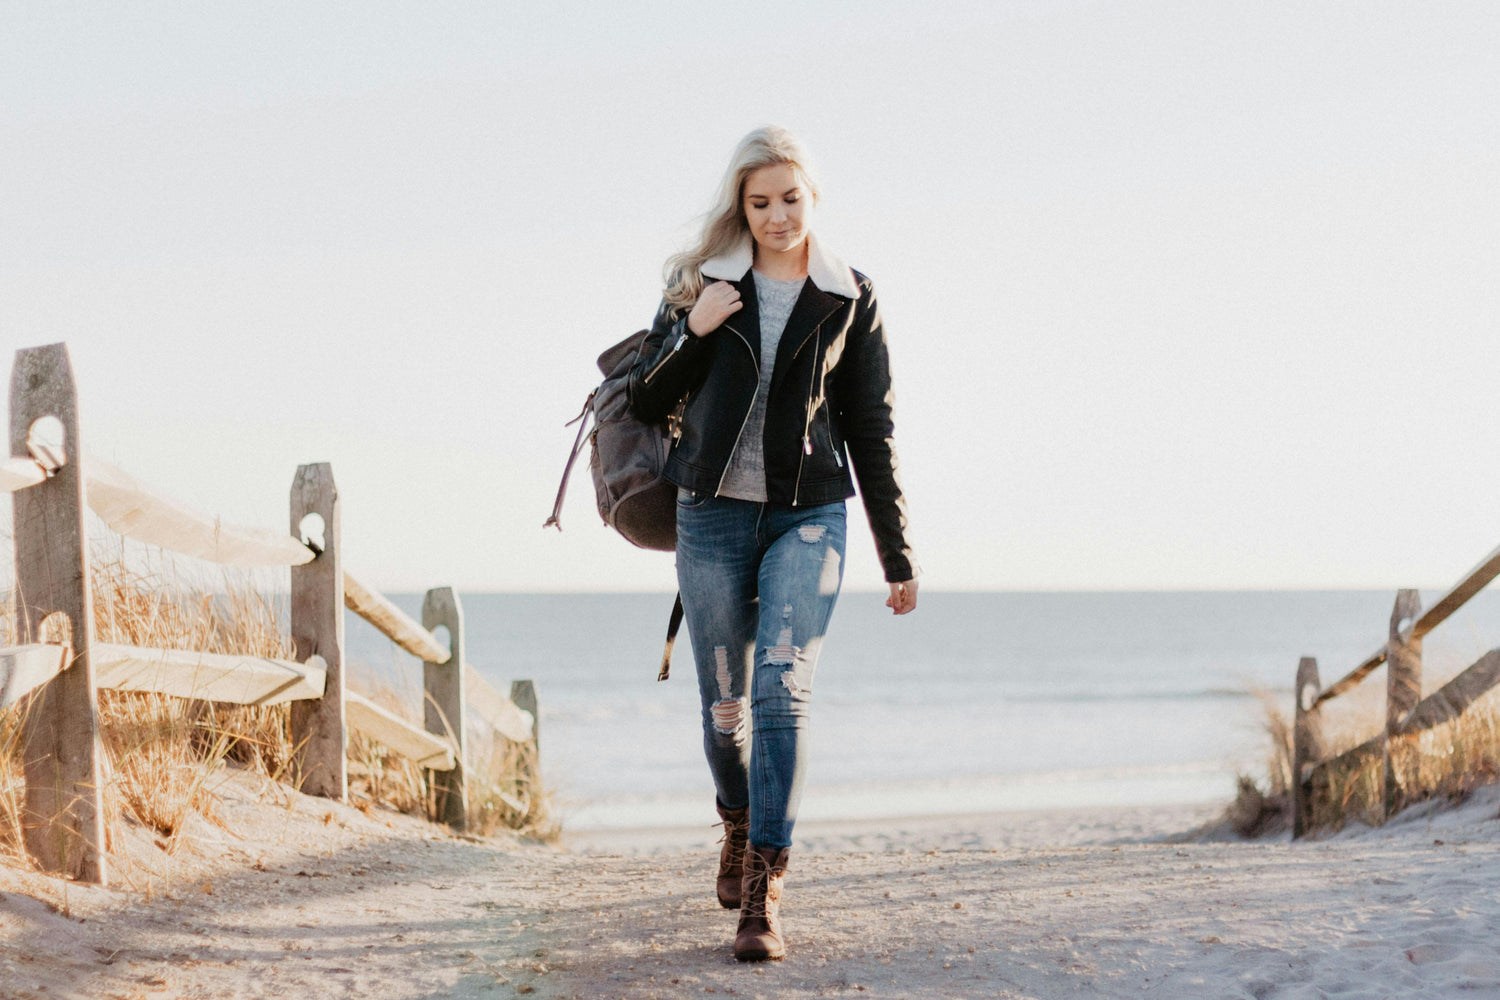 Woman in a leather coat and distressed jeans carrying a backpack over her shoulder walking down a path away from the ocean